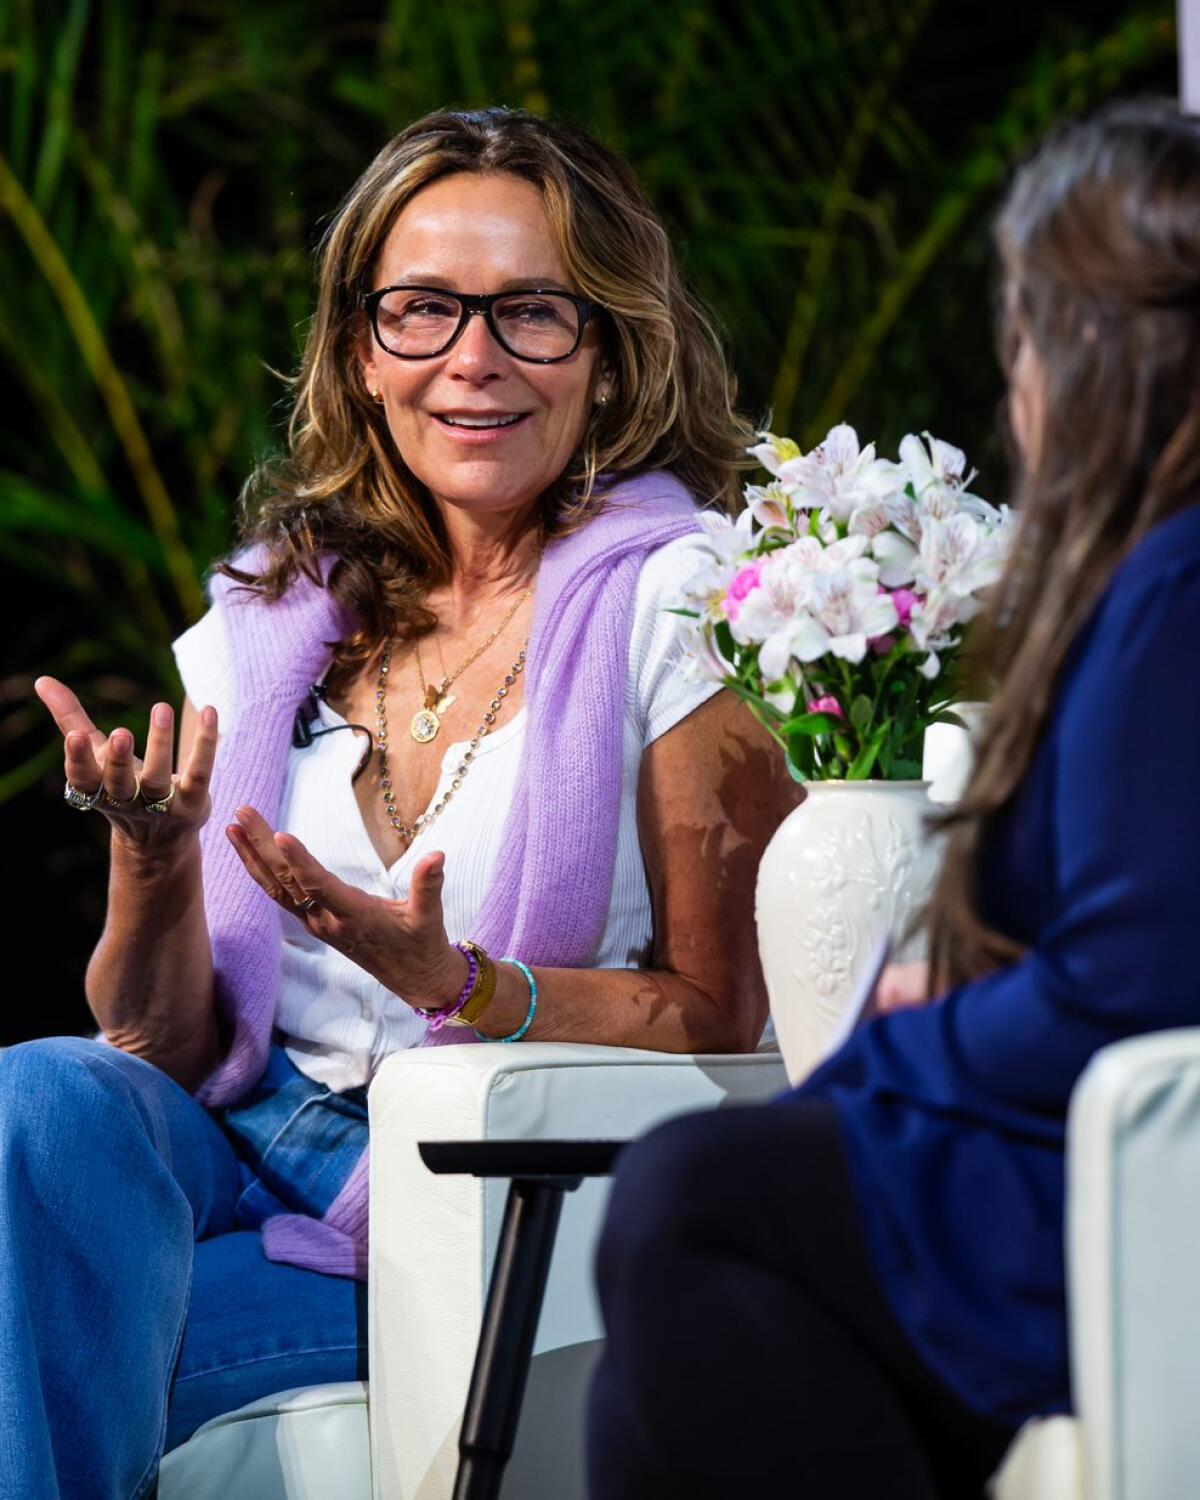  Jennifer Grey joined L.A. Times Book Club July 27, 2022 to discuss "Out of the Corner" at Montalban Theatre in Hollywood.